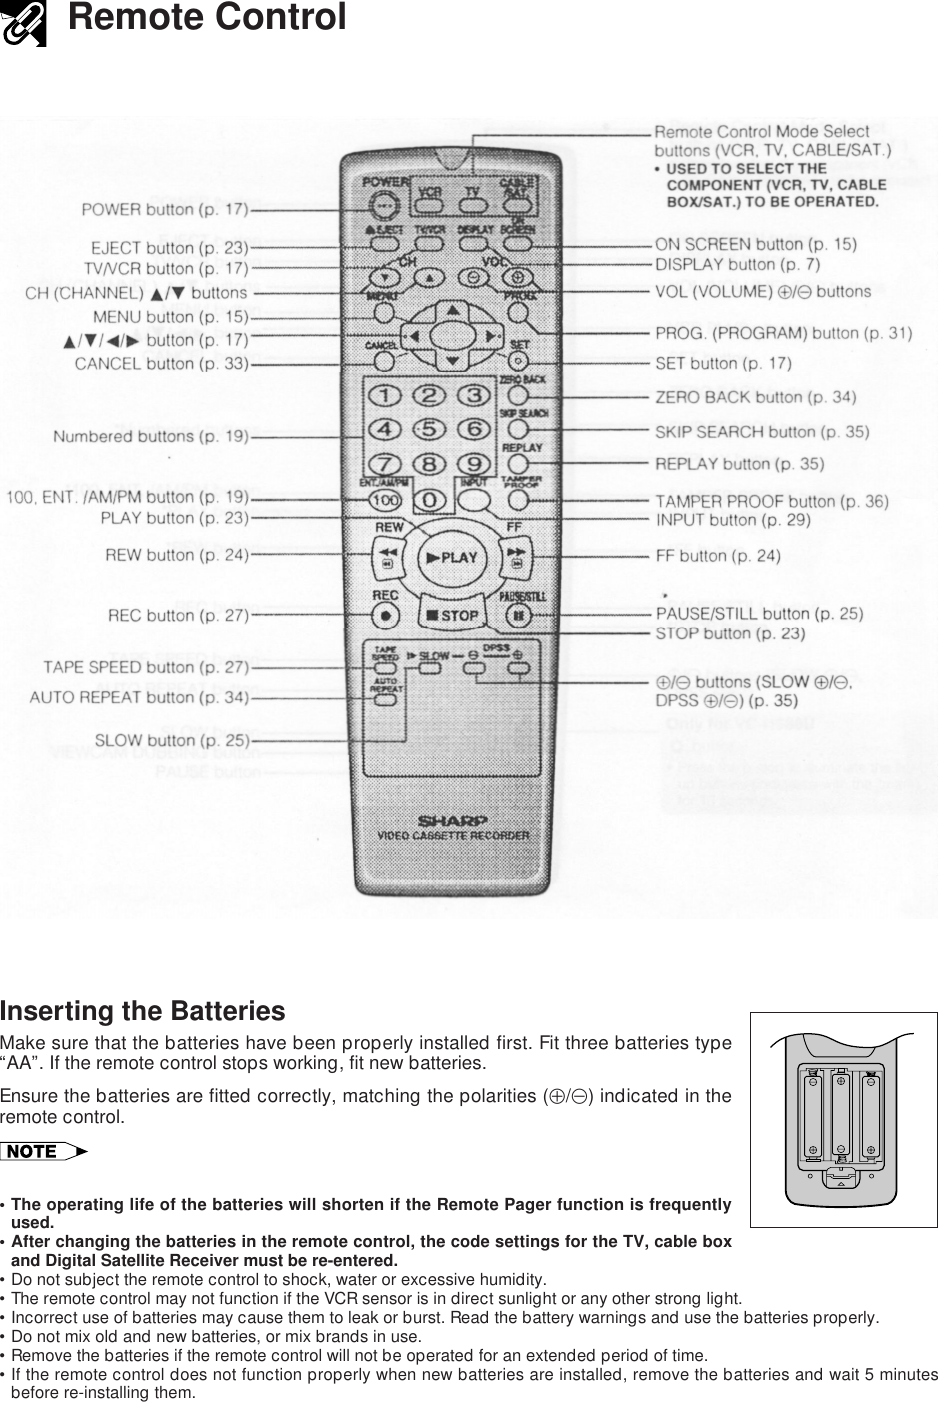 Remote ControlInserting the BatteriesMake sure that the batteries have been properly installed first. Fit three batteries type“AA”. If the remote control stops working, fit new batteries.Ensure the batteries are fitted correctly, matching the polarities (j/k) indicated in theremote control.• The operating life of the batteries will shorten if the Remote Pager function is frequentlyused.• After changing the batteries in the remote control, the code settings for the TV, cable boxand Digital Satellite Receiver must be re-entered.•Do not subject the remote control to shock, water or excessive humidity.•The remote control may not function if the VCR sensor is in direct sunlight or any other strong light.•Incorrect use of batteries may cause them to leak or burst. Read the battery warnings and use the batteries properly.•Do not mix old and new batteries, or mix brands in use.•Remove the batteries if the remote control will not be operated for an extended period of time.•If the remote control does not function properly when new batteries are installed, remove the batteries and wait 5 minutesbefore re-installing them.